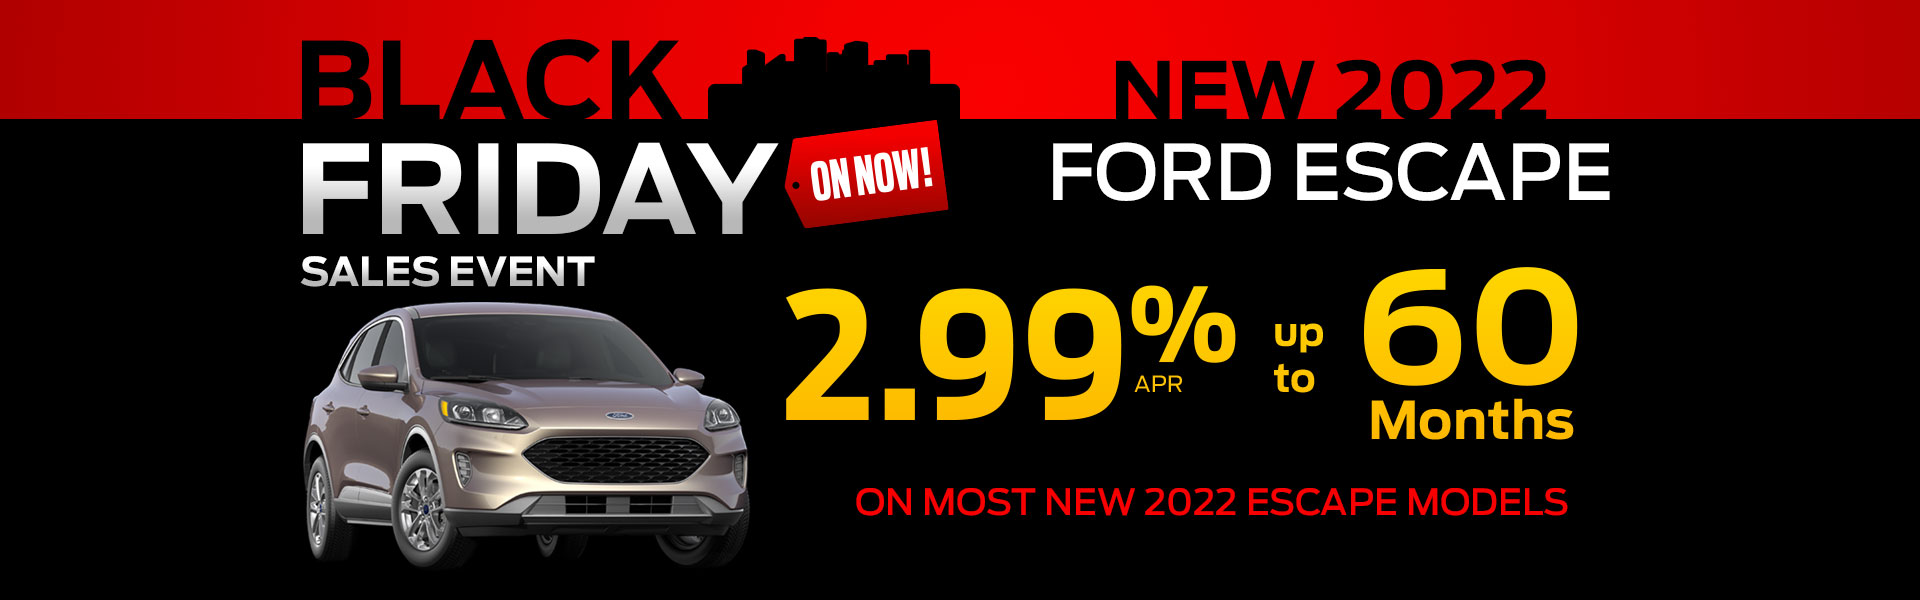 2022 Ford Escape Black Friday Sales Event